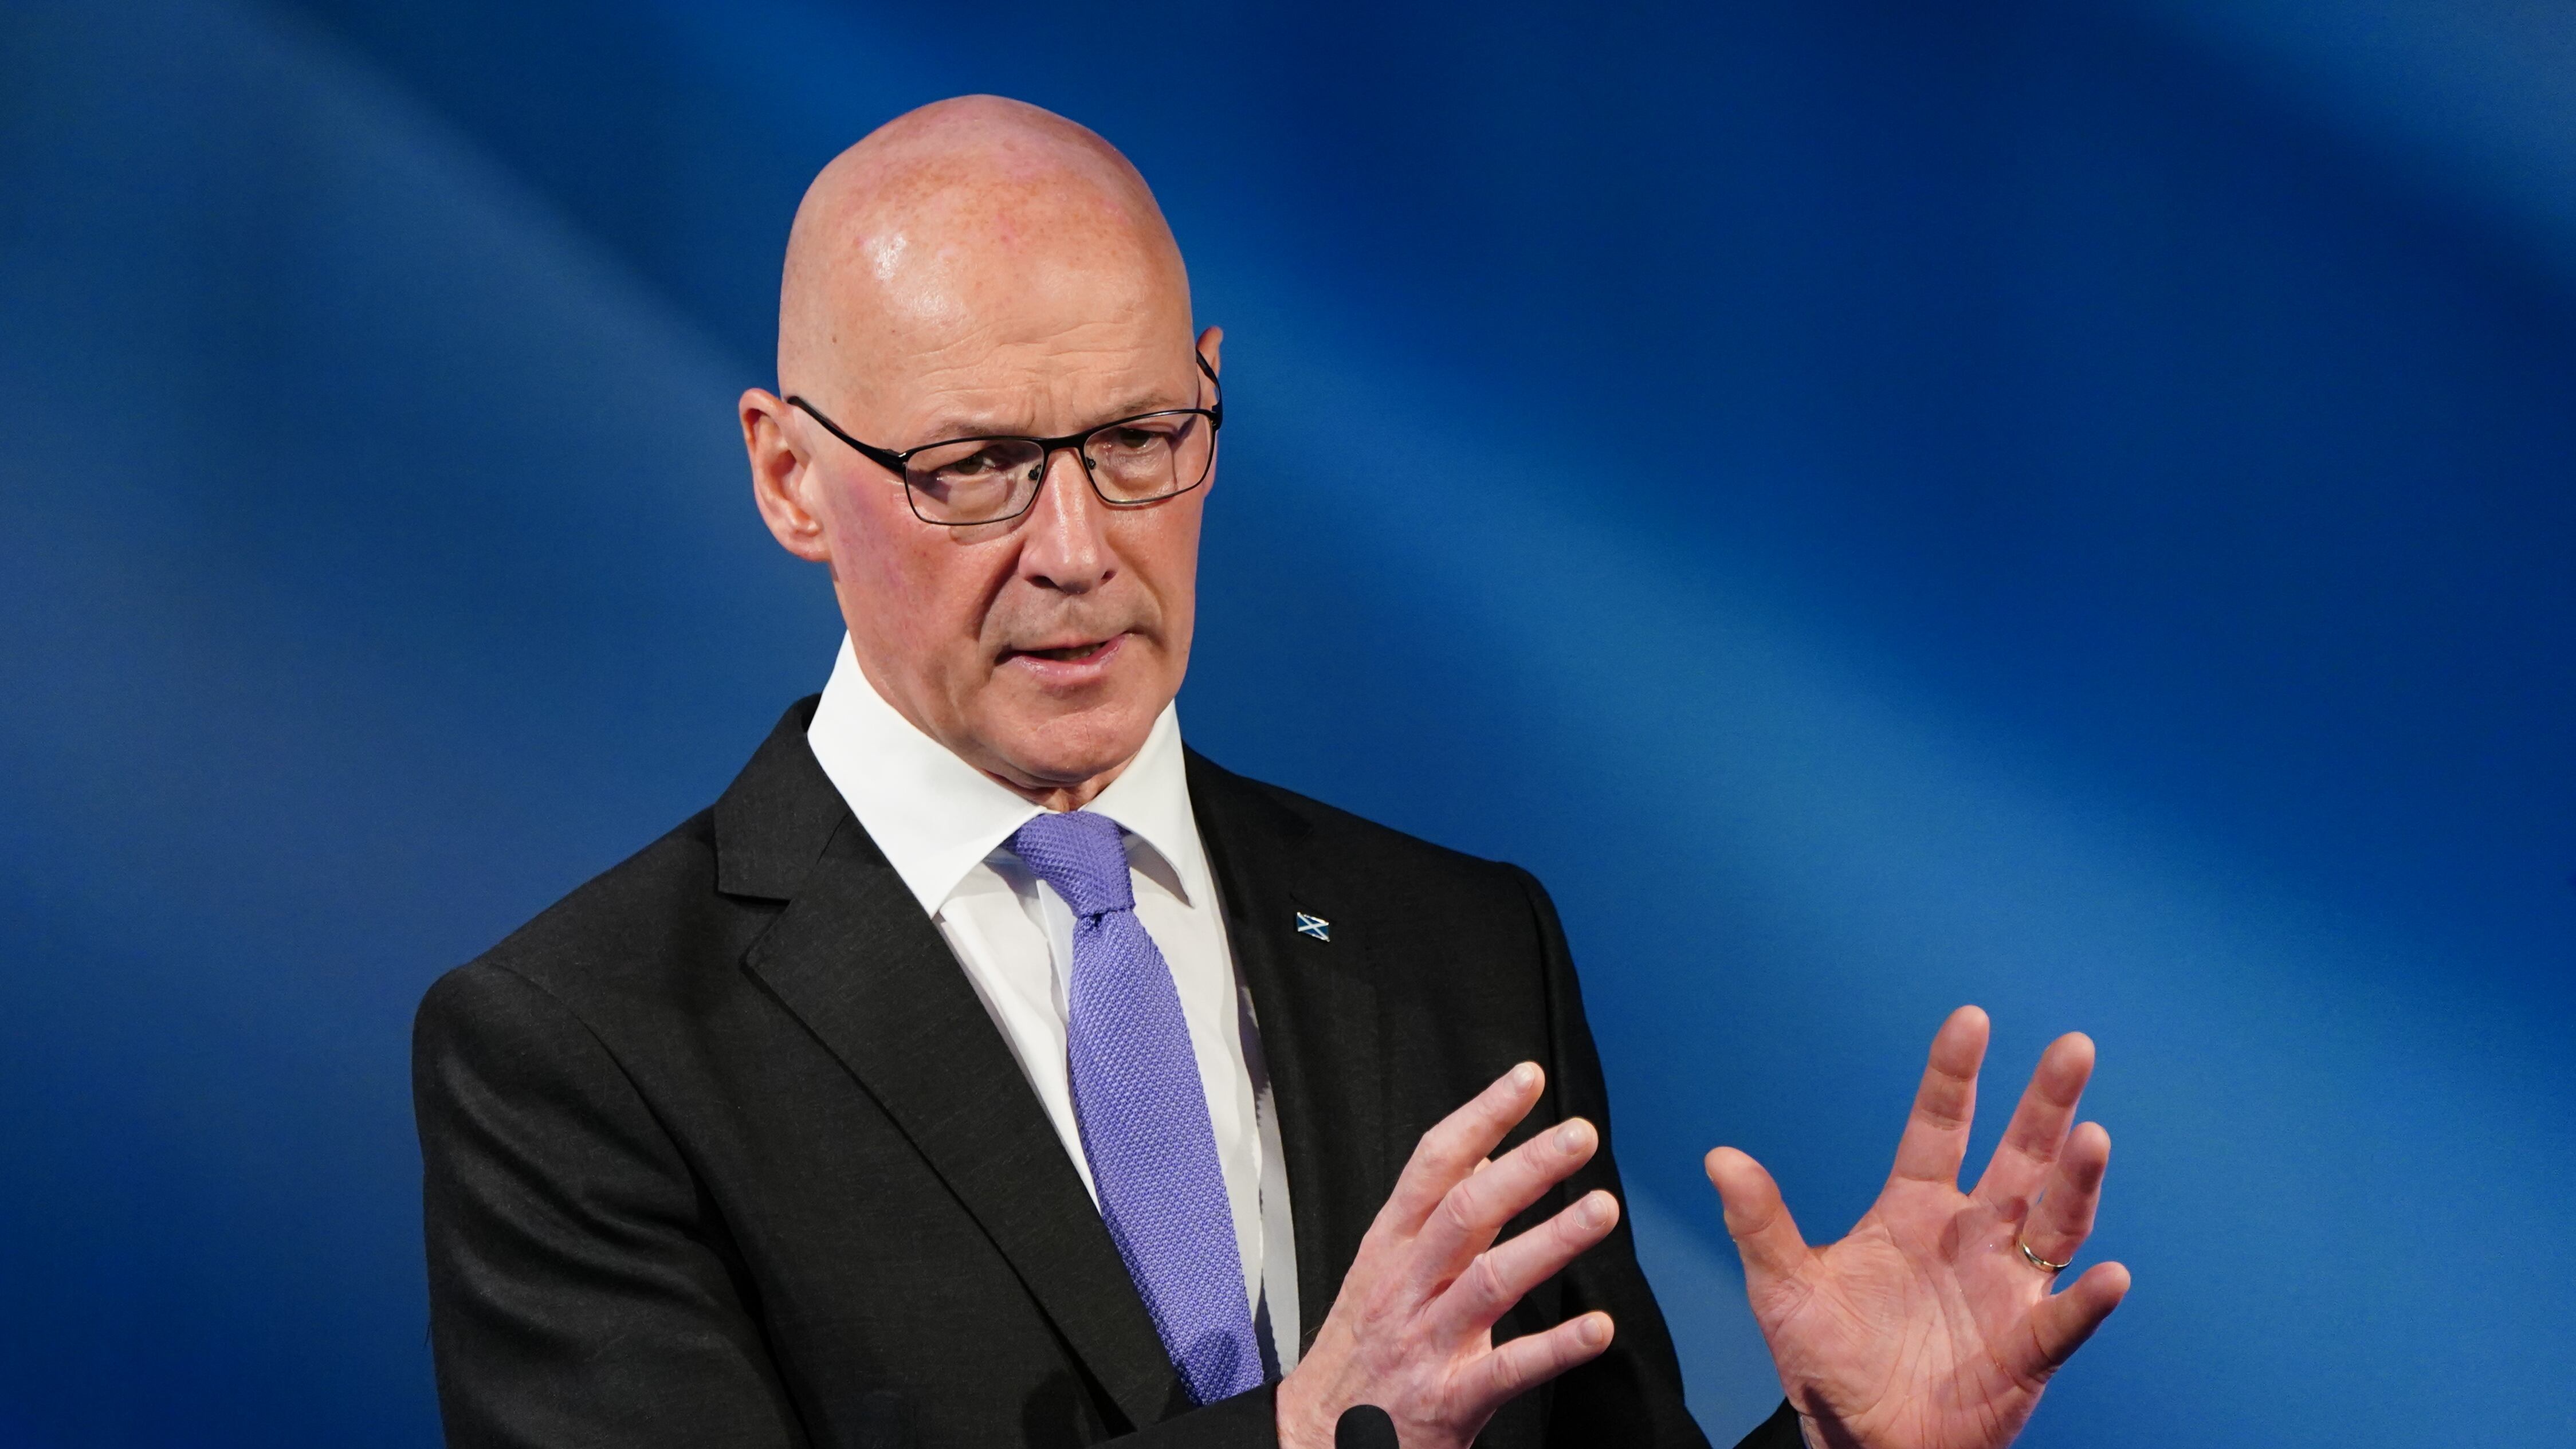 Scottish First Minister John Swinney appealed to voters to back his party if they believed Brexit was a ‘mistake’